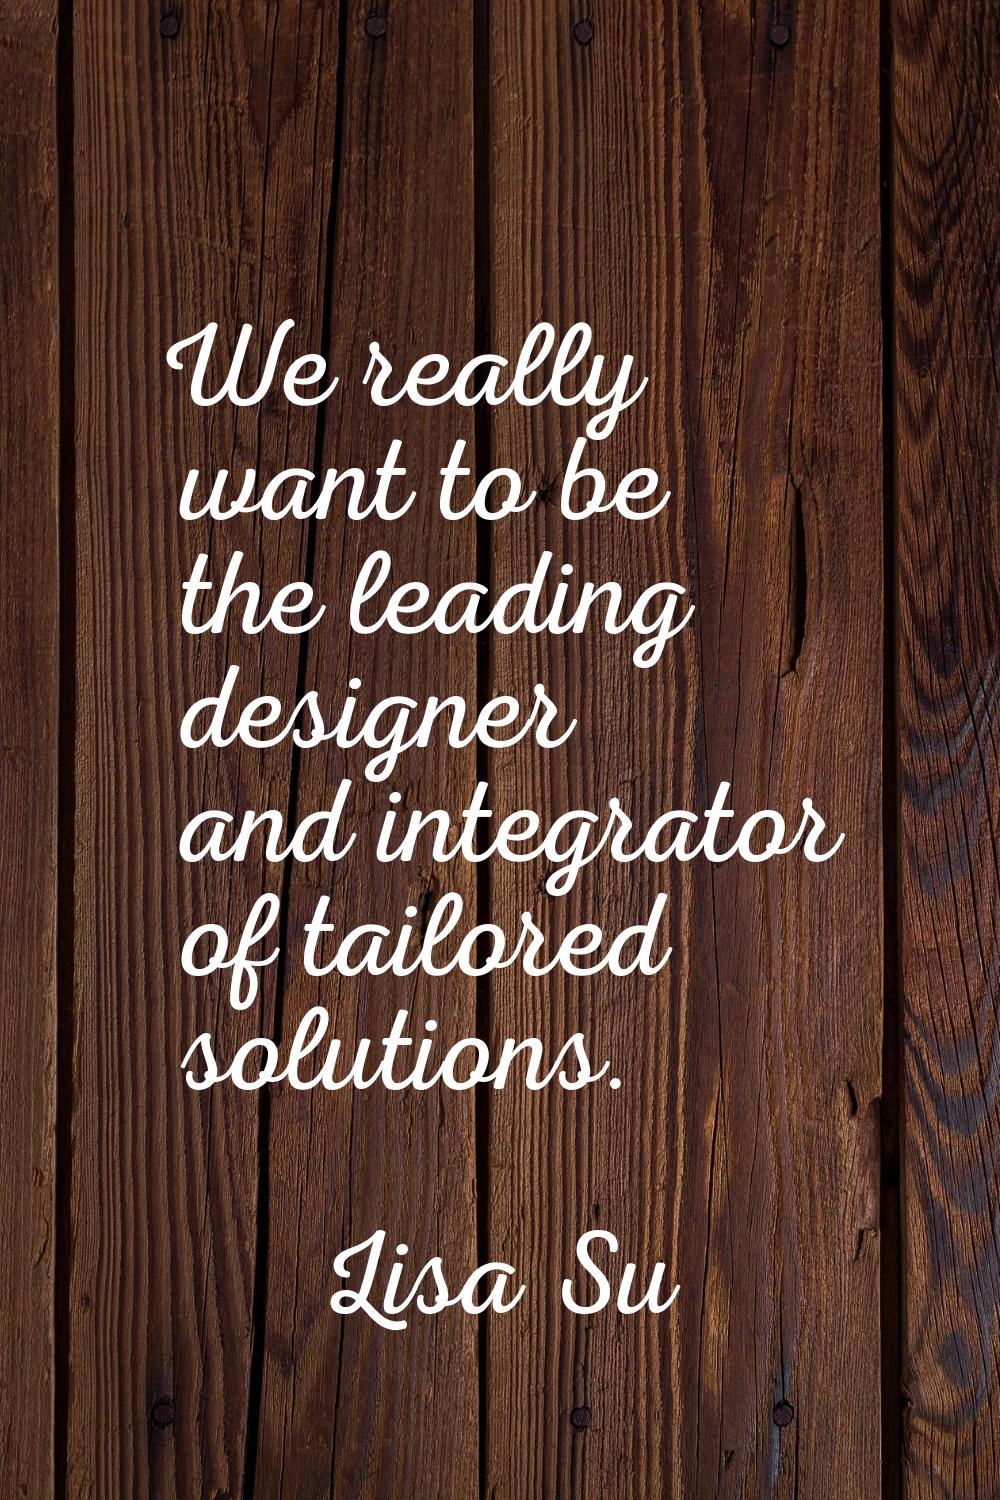 We really want to be the leading designer and integrator of tailored solutions.